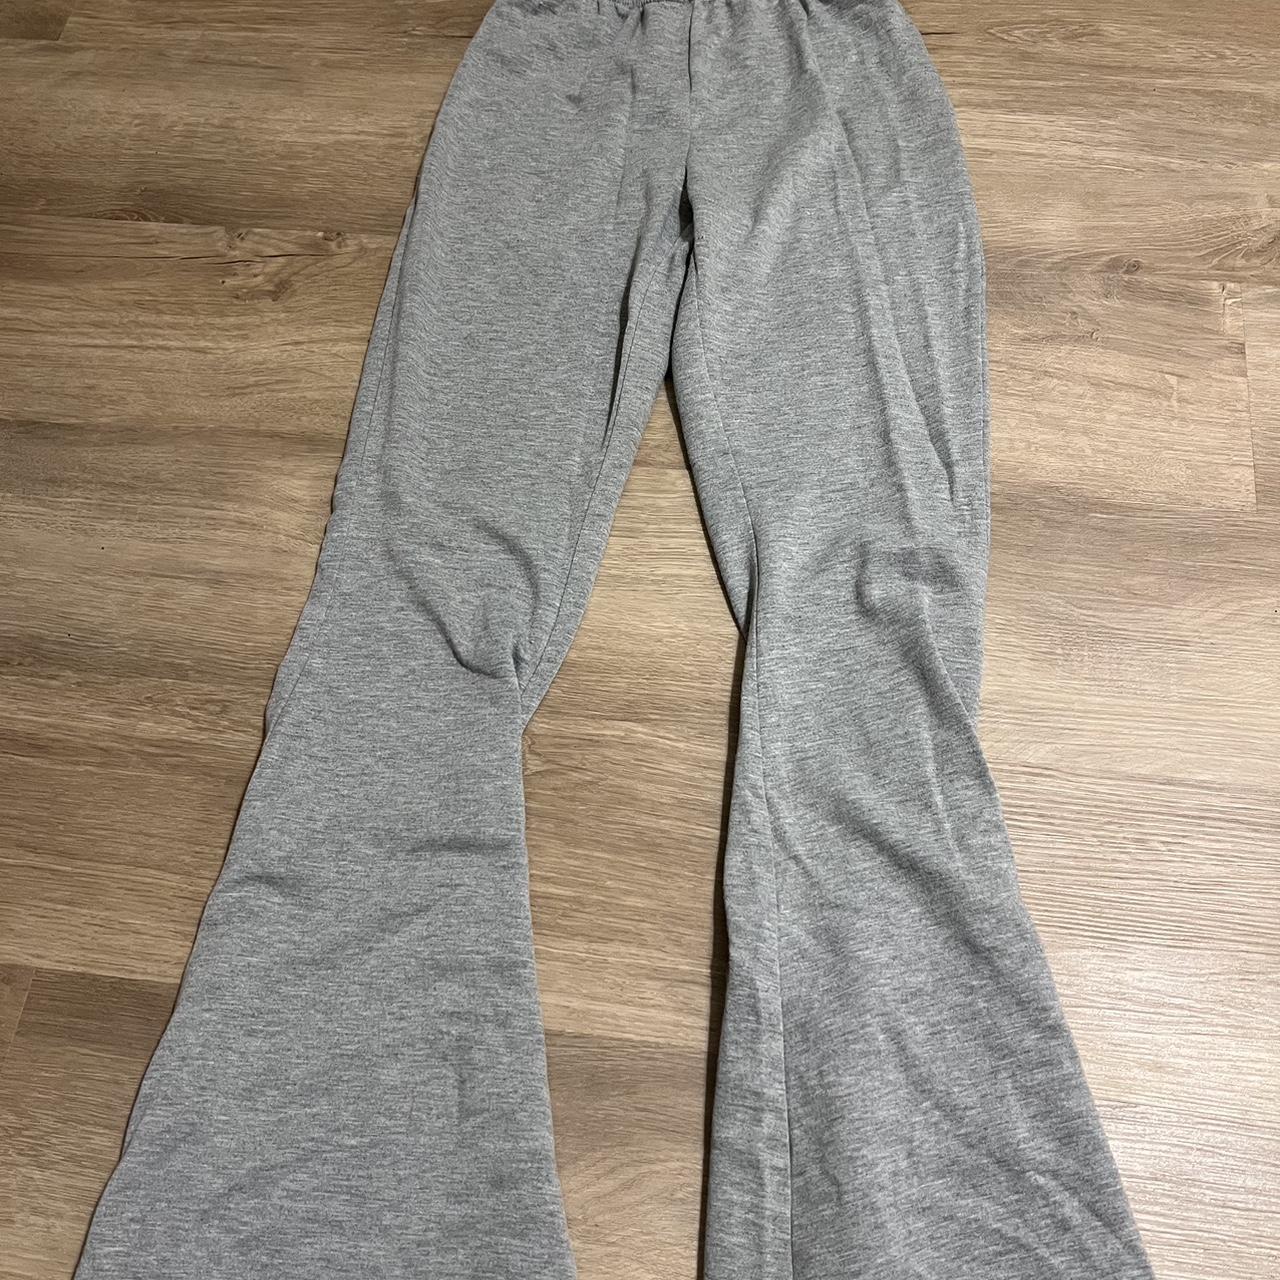 NEW Happily Grey Pink Crossover Flare Leggings - Depop